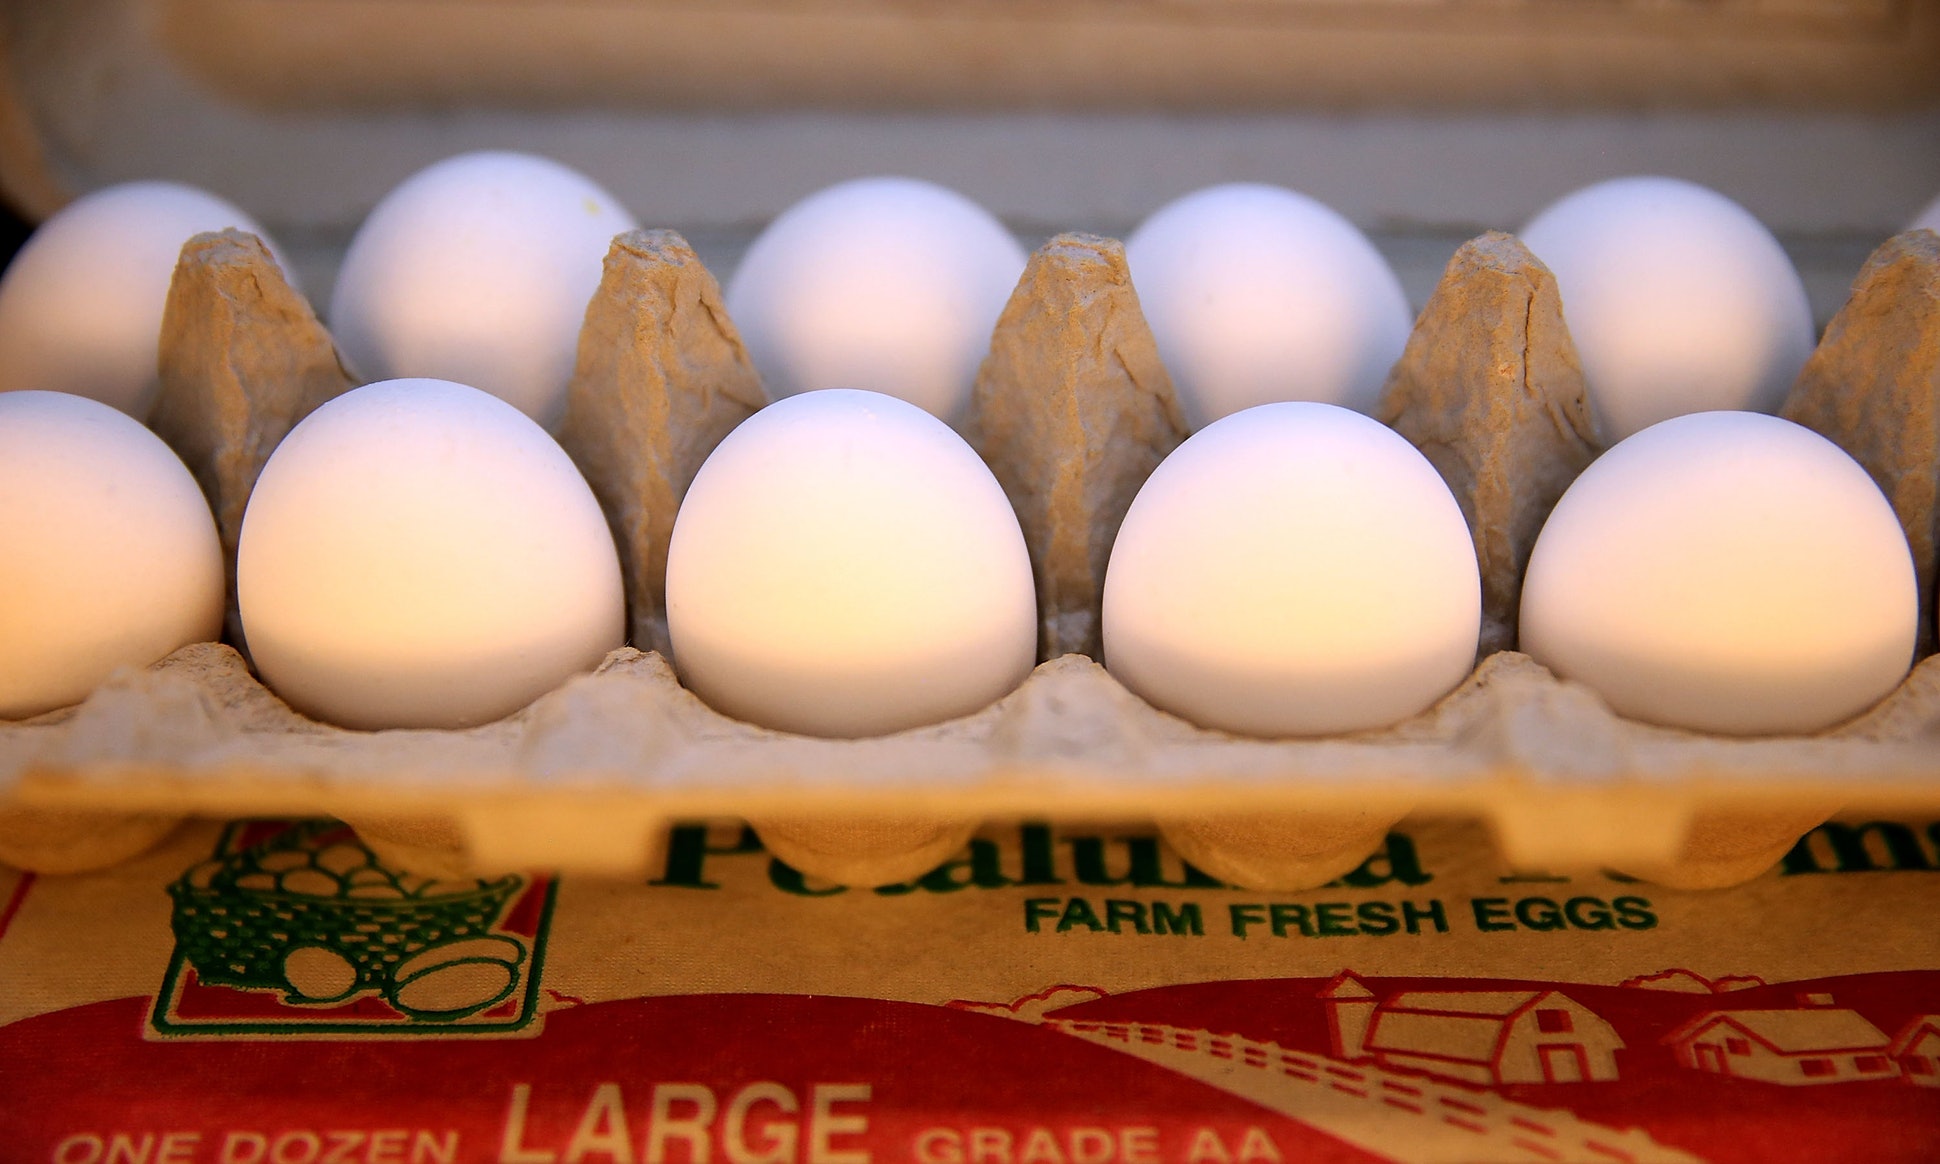 More Than 200 Million Eggs Recalled Over Salmonella Fears